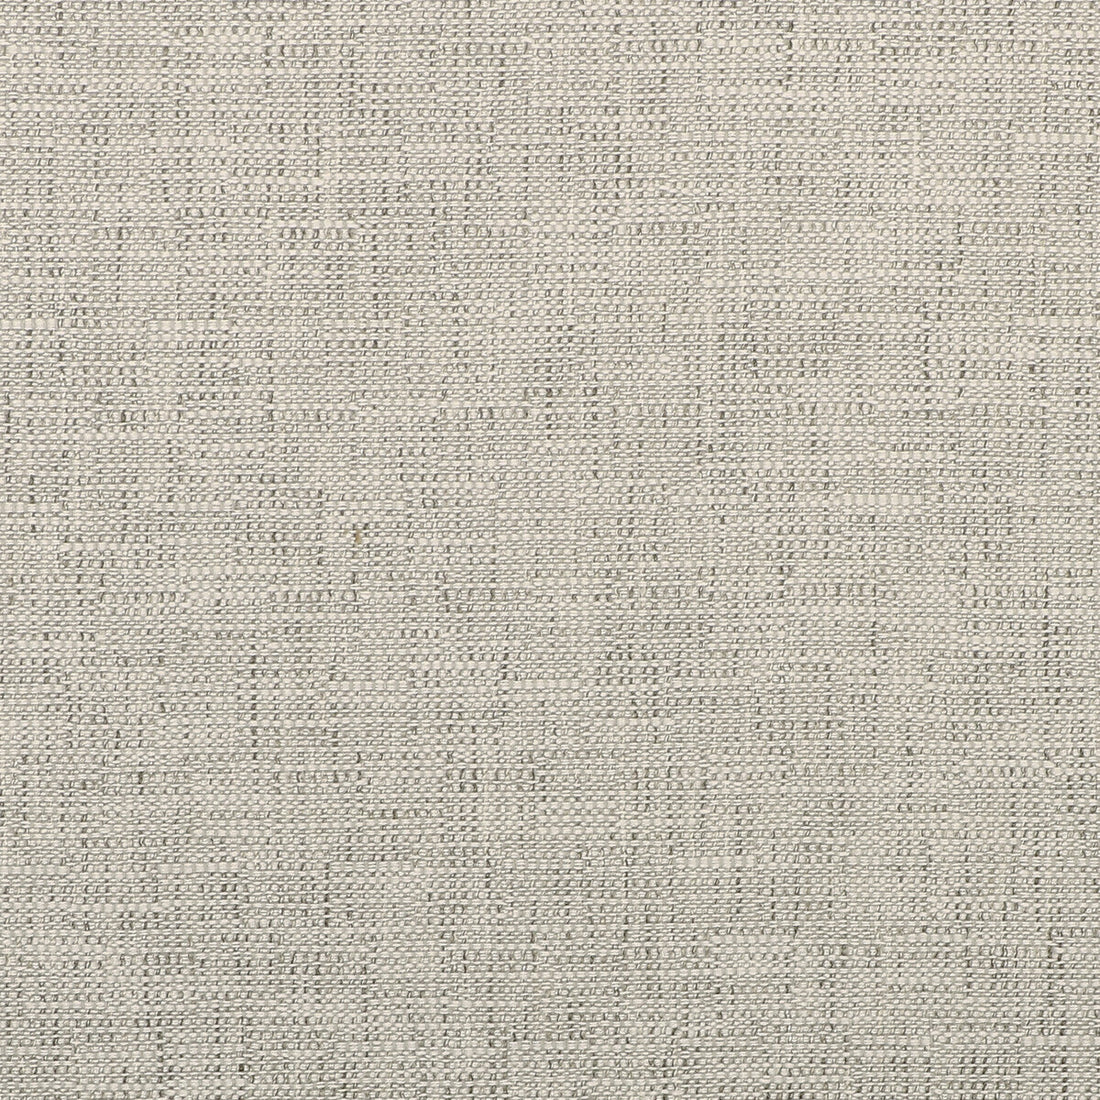 Oaks fabric in cloud color - pattern 35980.111.0 - by Kravet Design in the Barry Lantz Canvas To Cloth collection